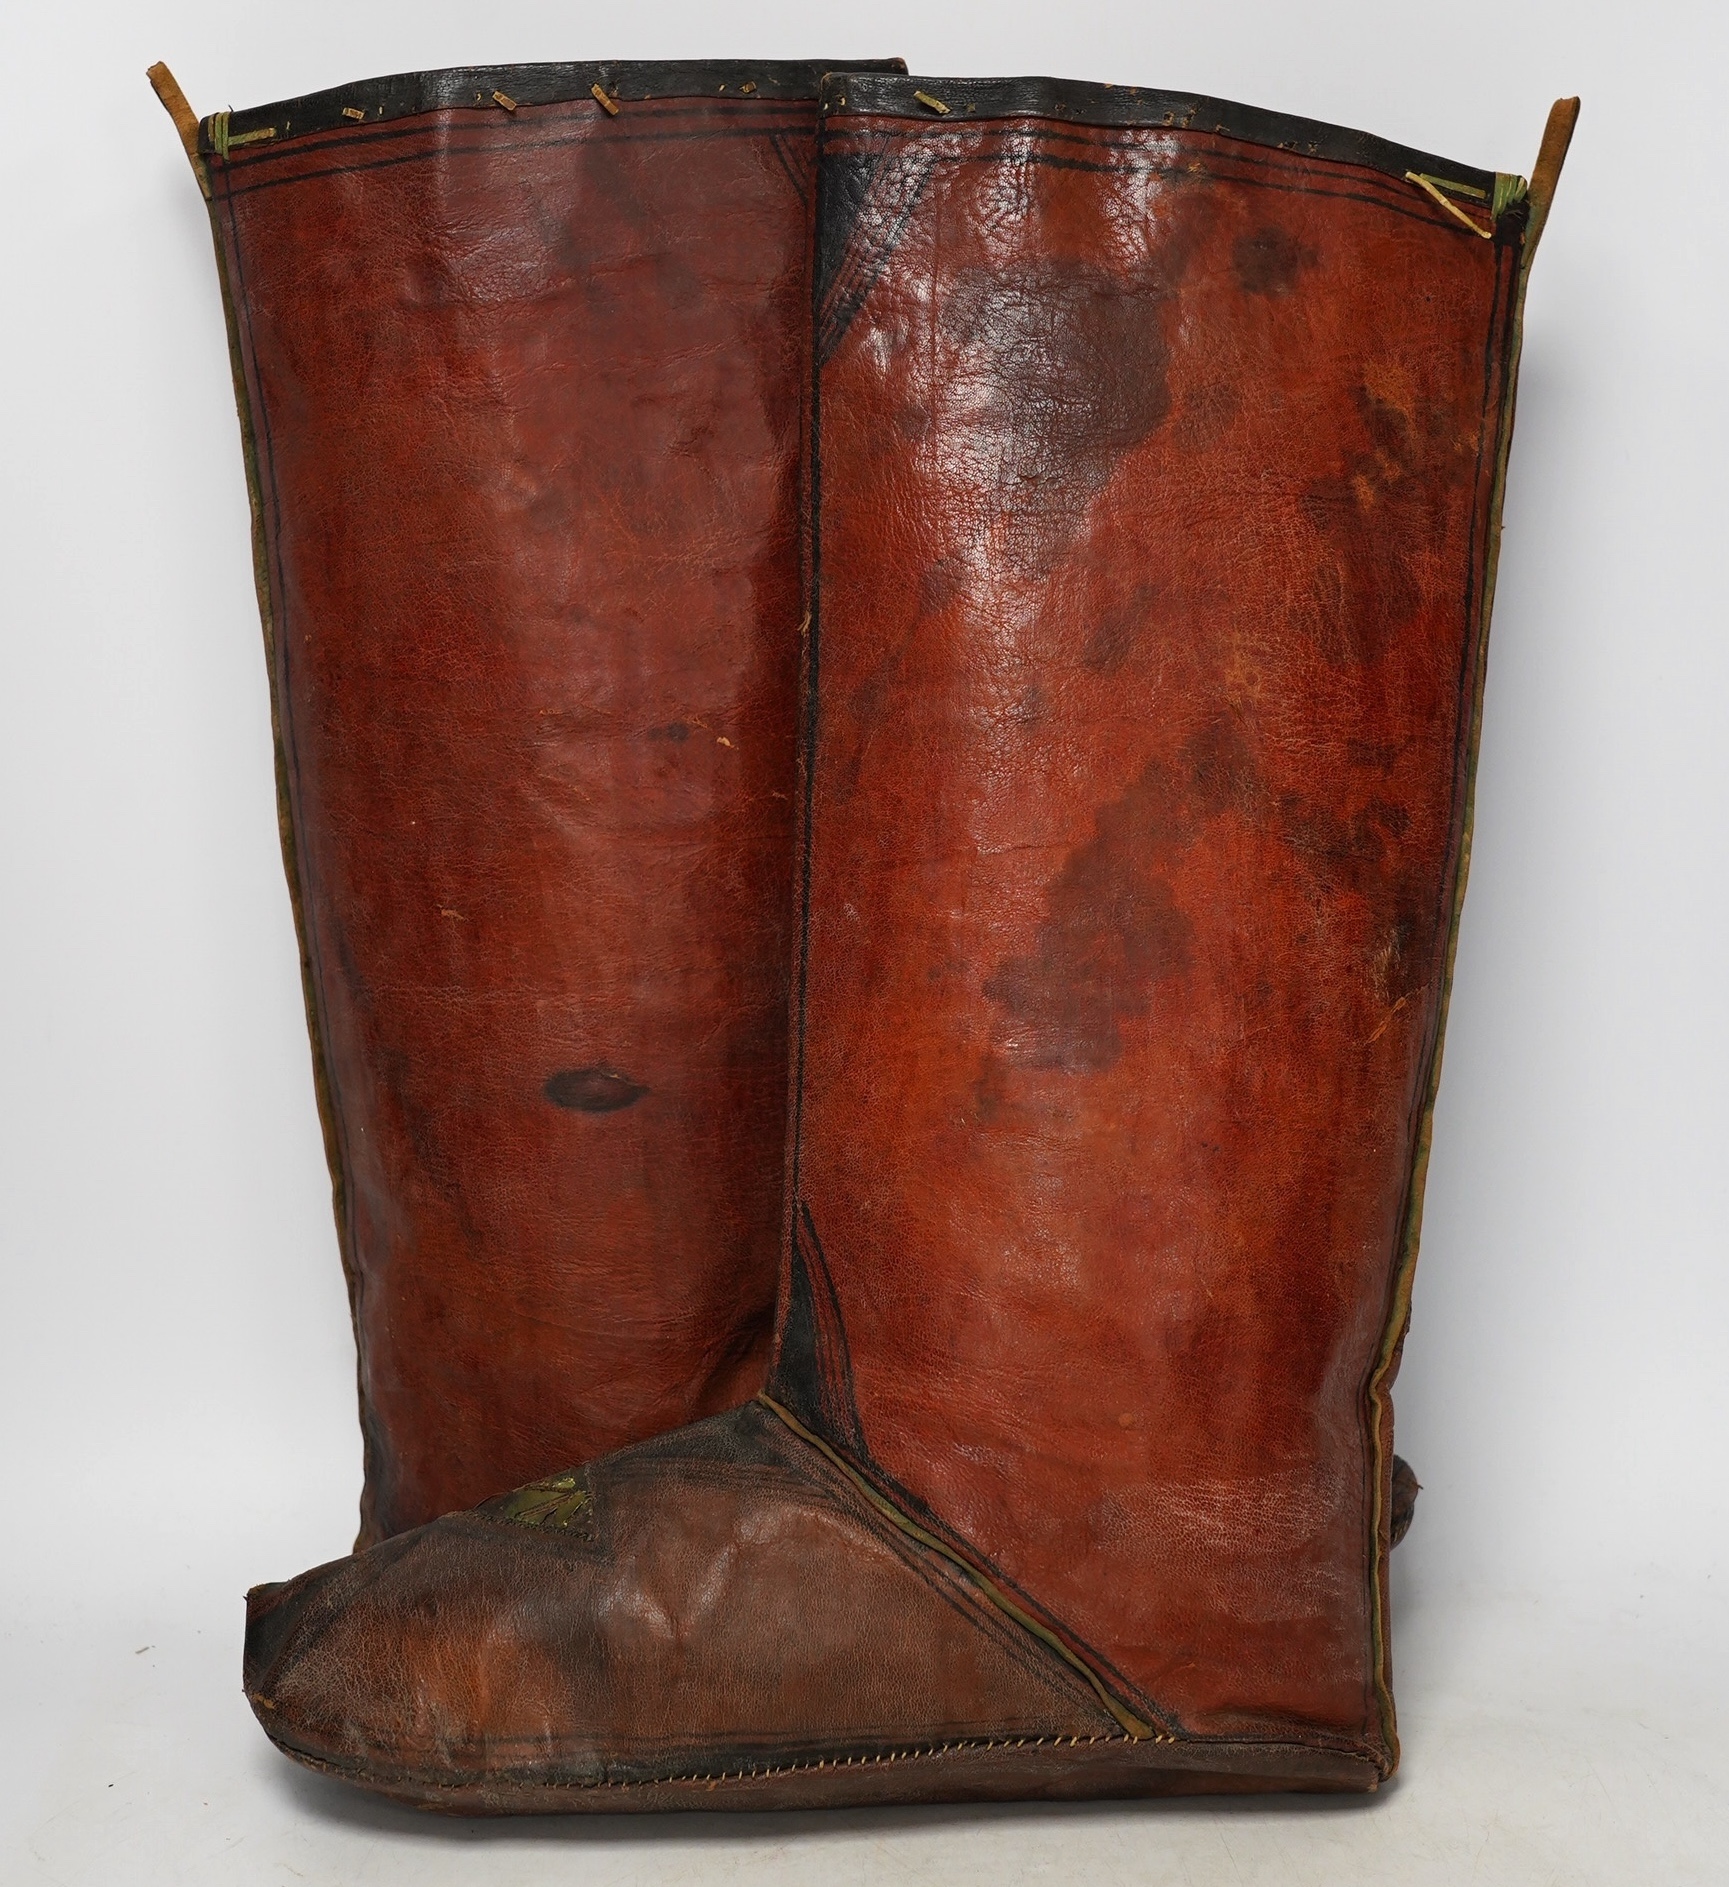 A pair of African tribal leather boots, North Ghana, Fulani tribe. Condition - fair